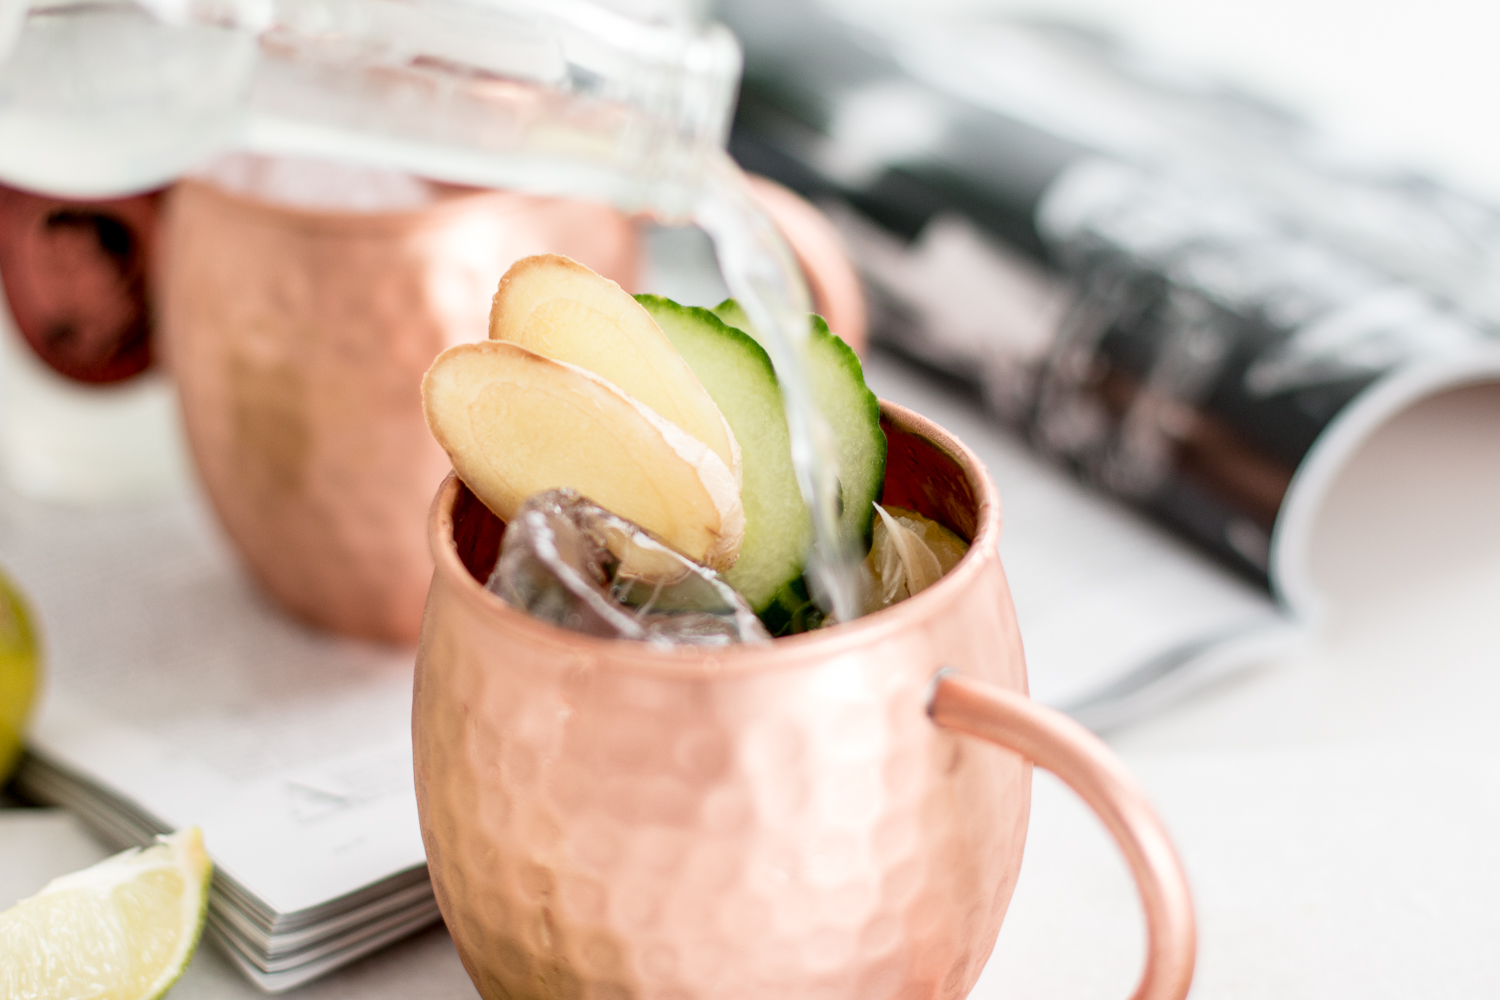 Moscow Mule Rezept | Love Daily Dose